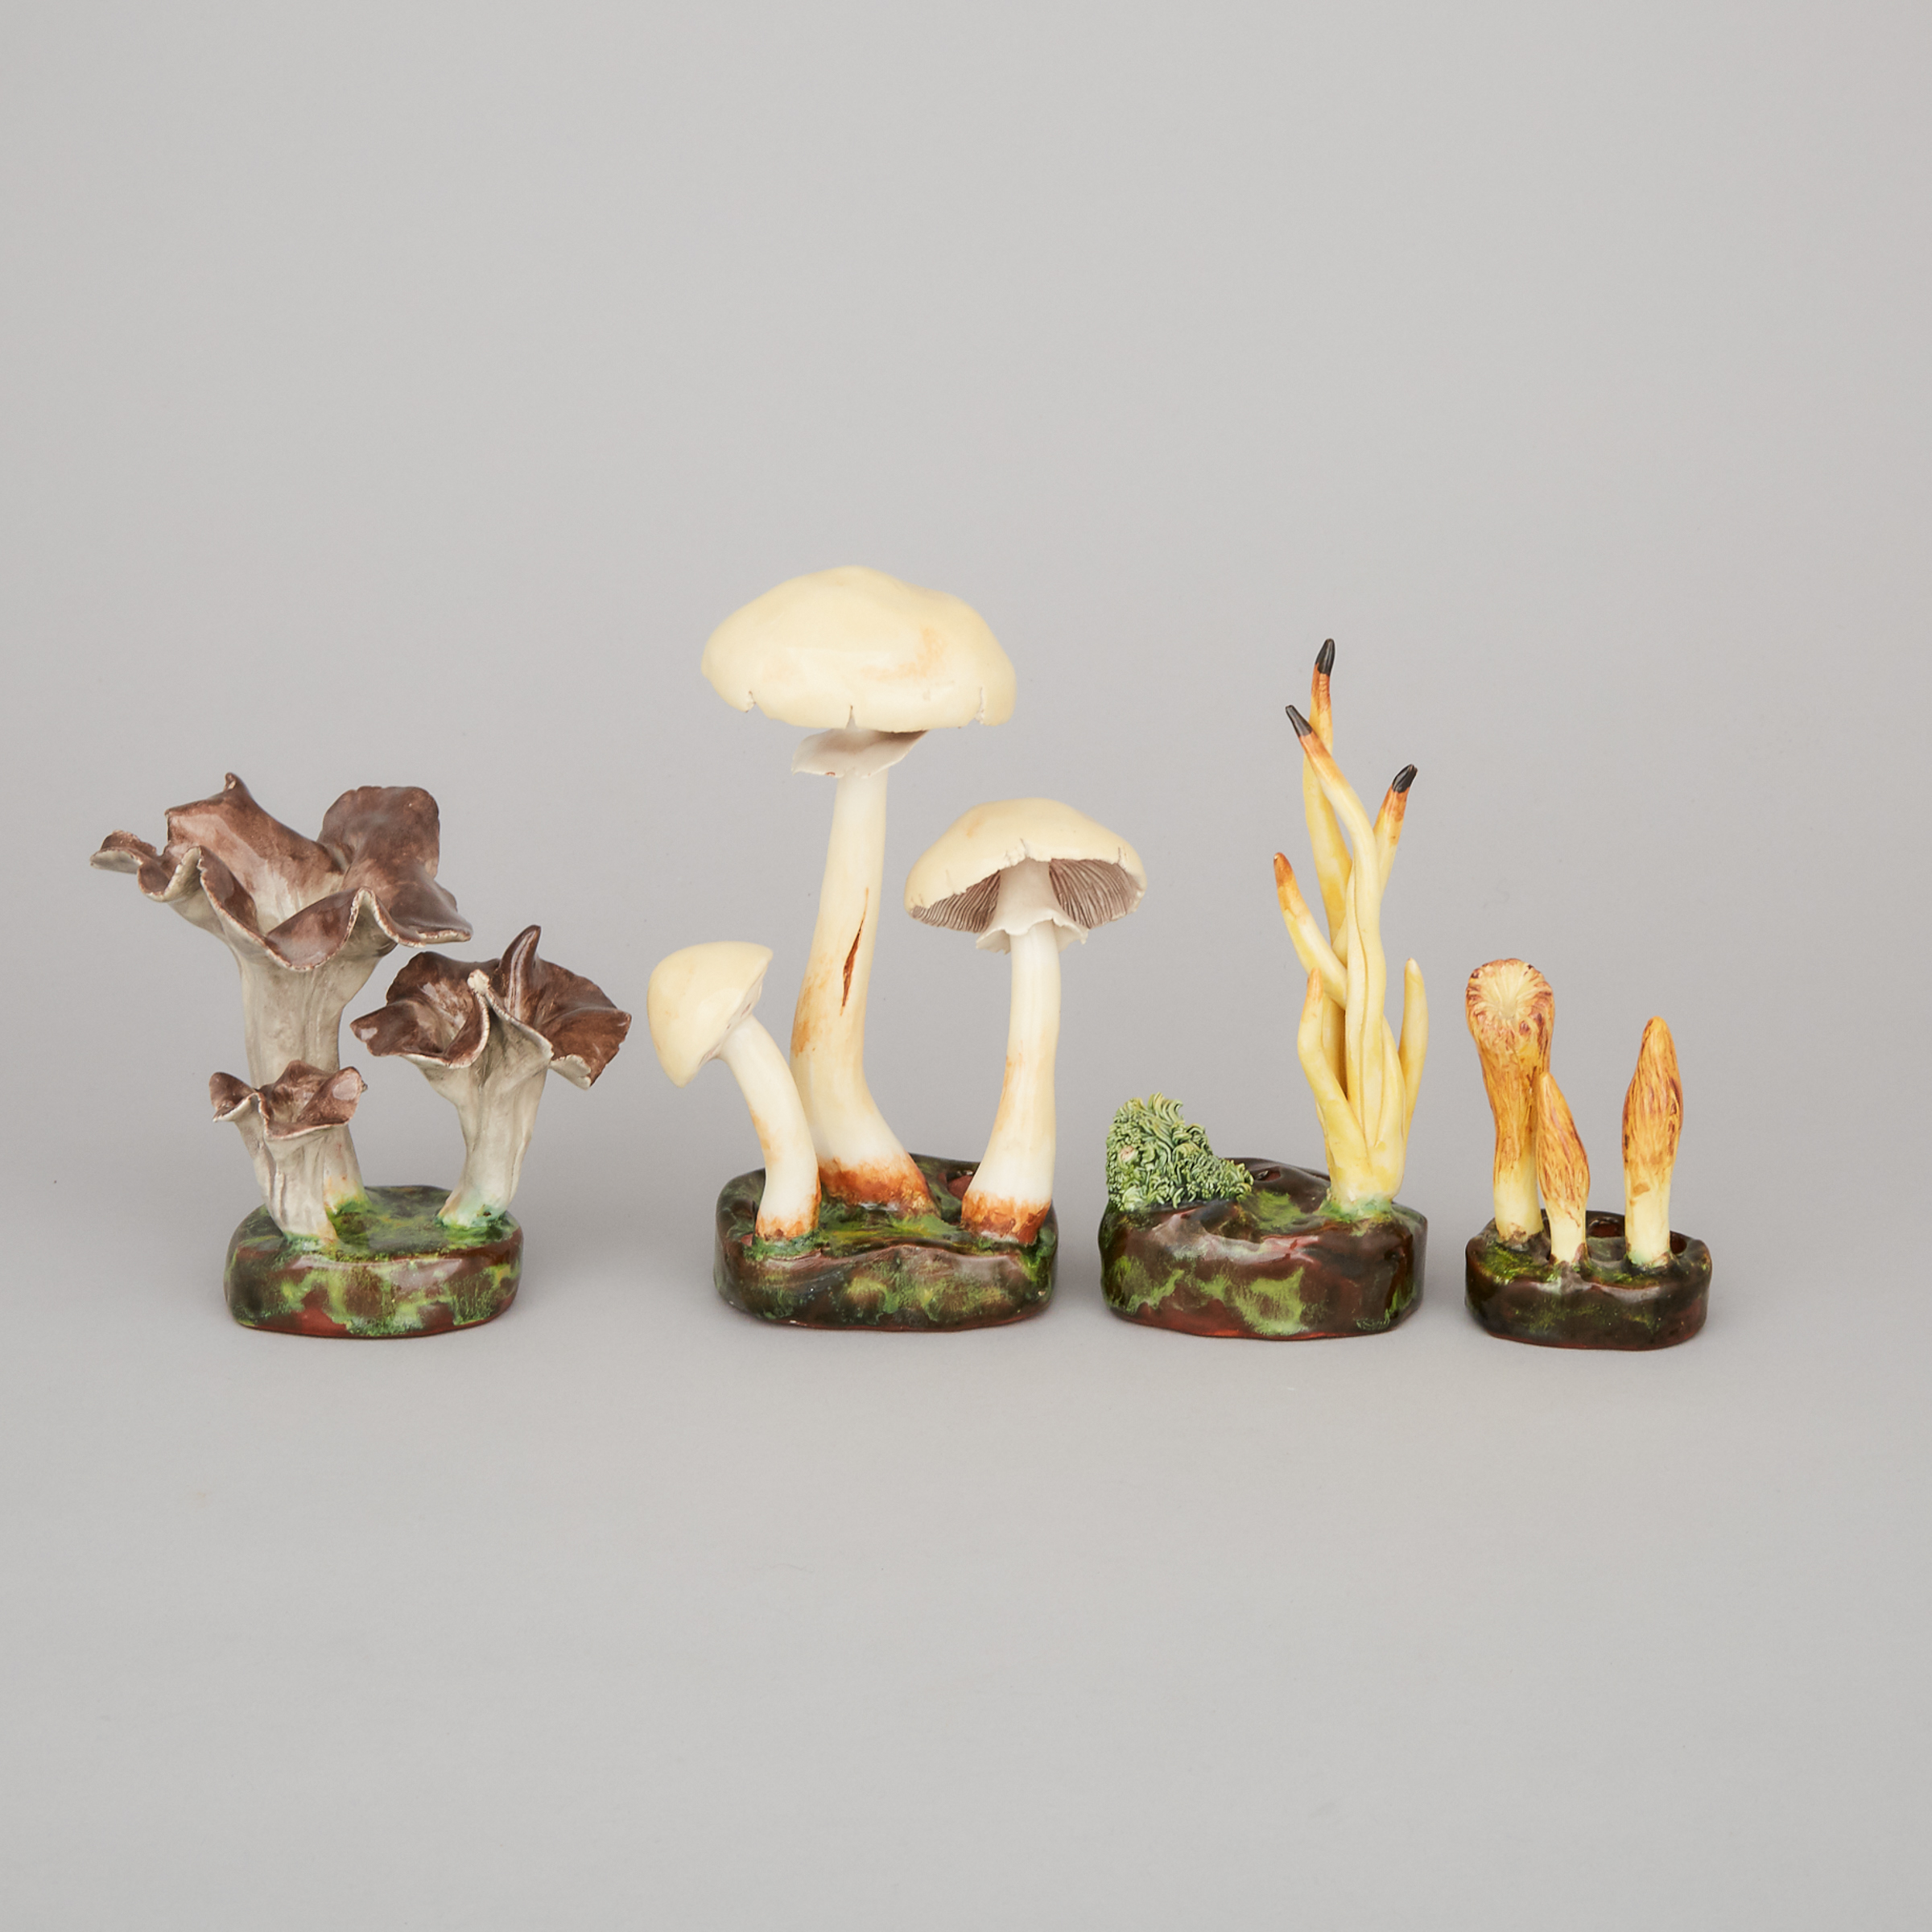 Four Lorenzen Pottery Mycological Groups, 20th century